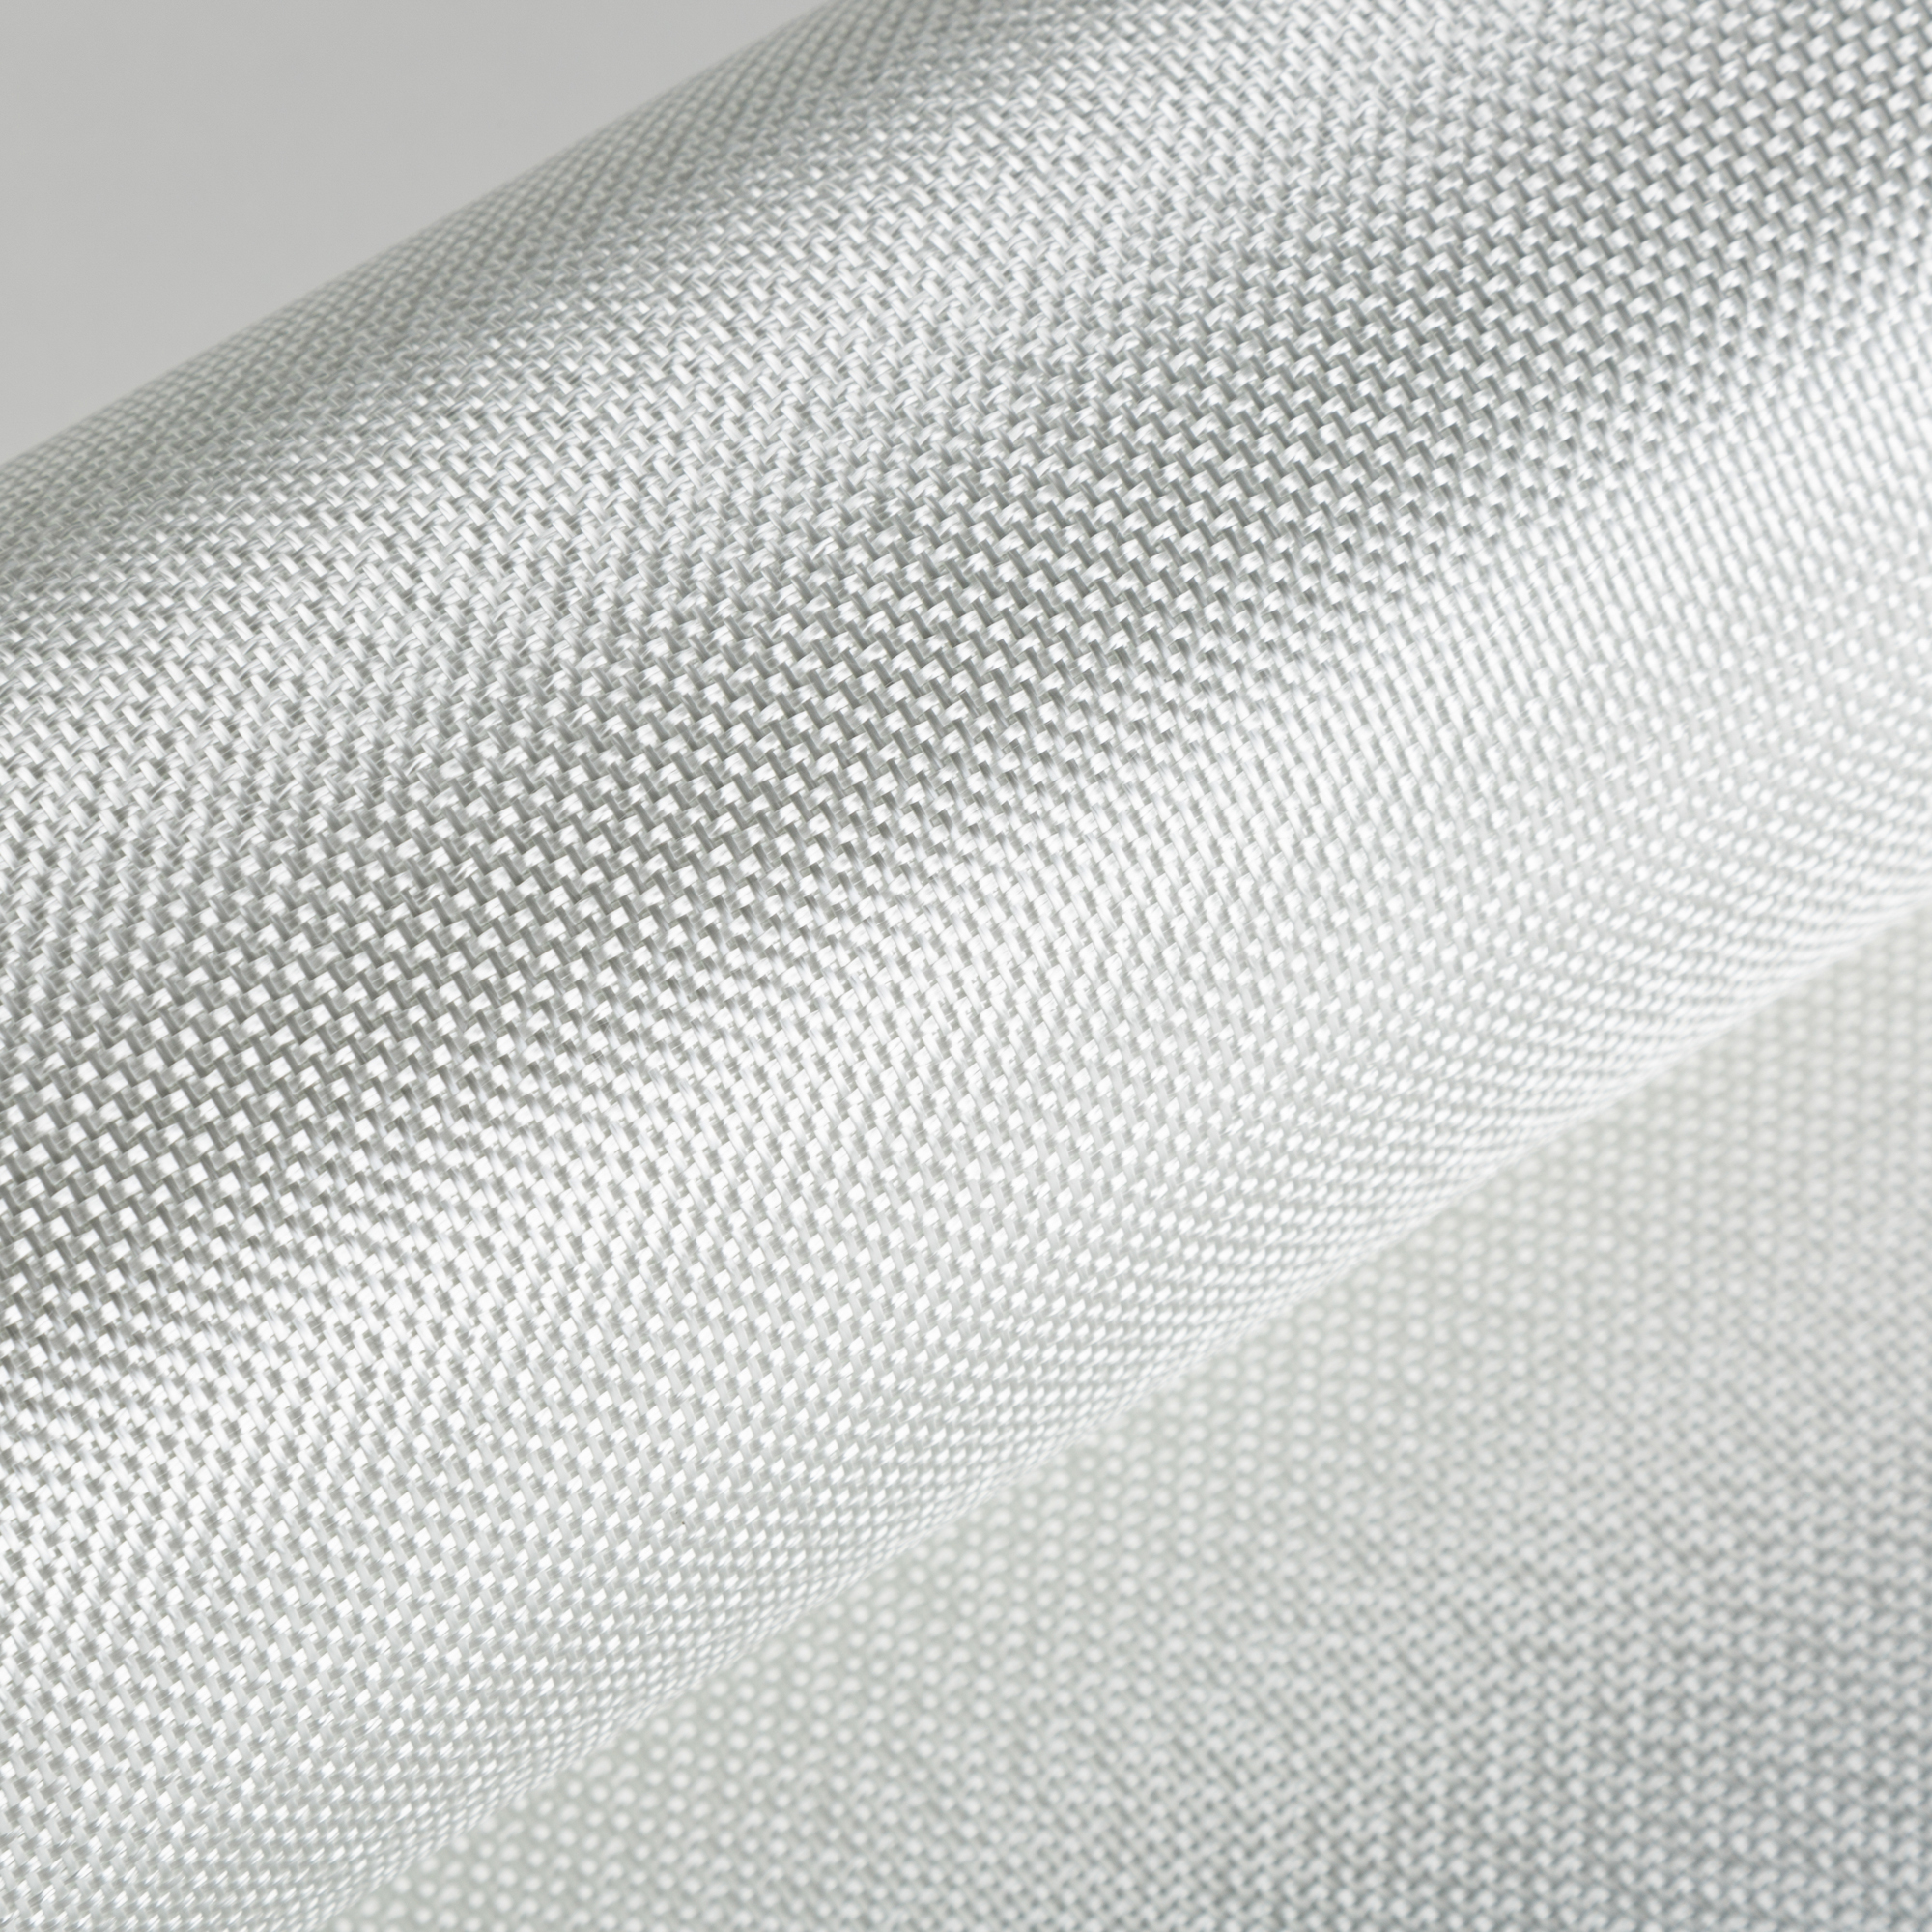 Excellent Dimensional Stability and Surface Flat Fiberglass Plain Cloth